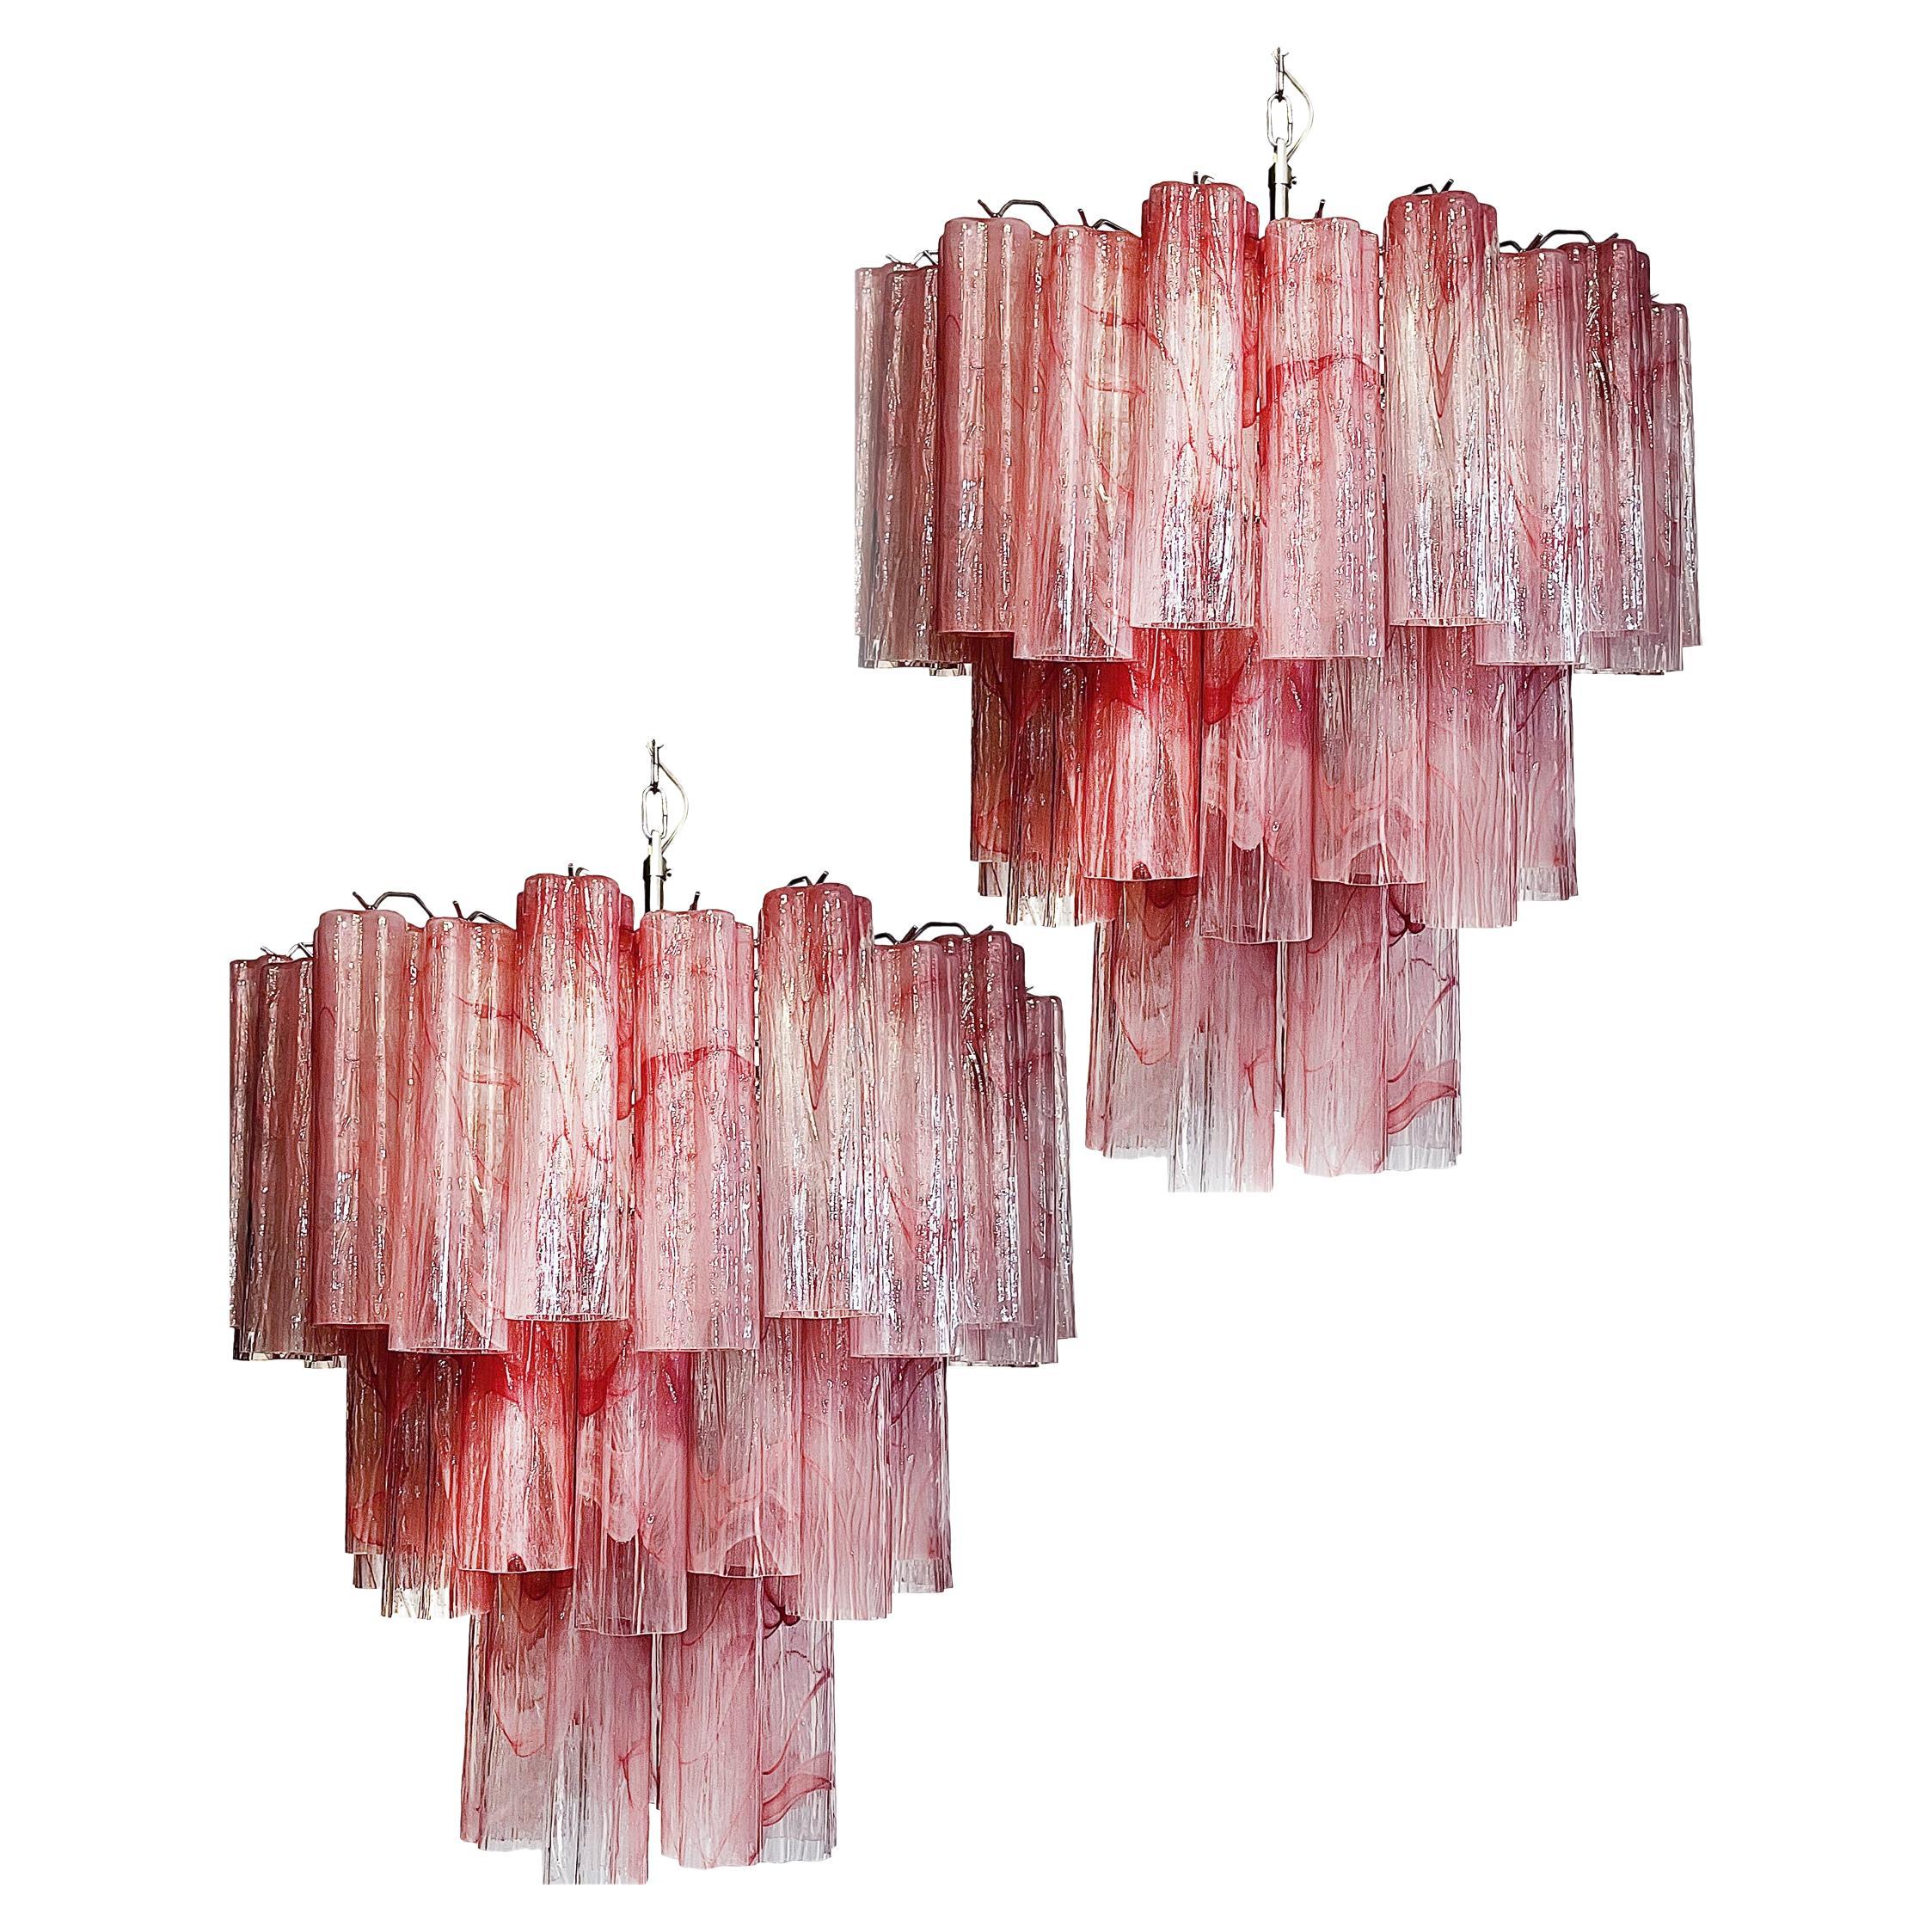 Italian vintage chandeliers in Murano glass and nickel-plated metal structure. The armor polished nickel supports 48 large glass tubes in a star shape. The alabaster technique created in Venetian glassworks gives the glass an elegant grain.
Period: